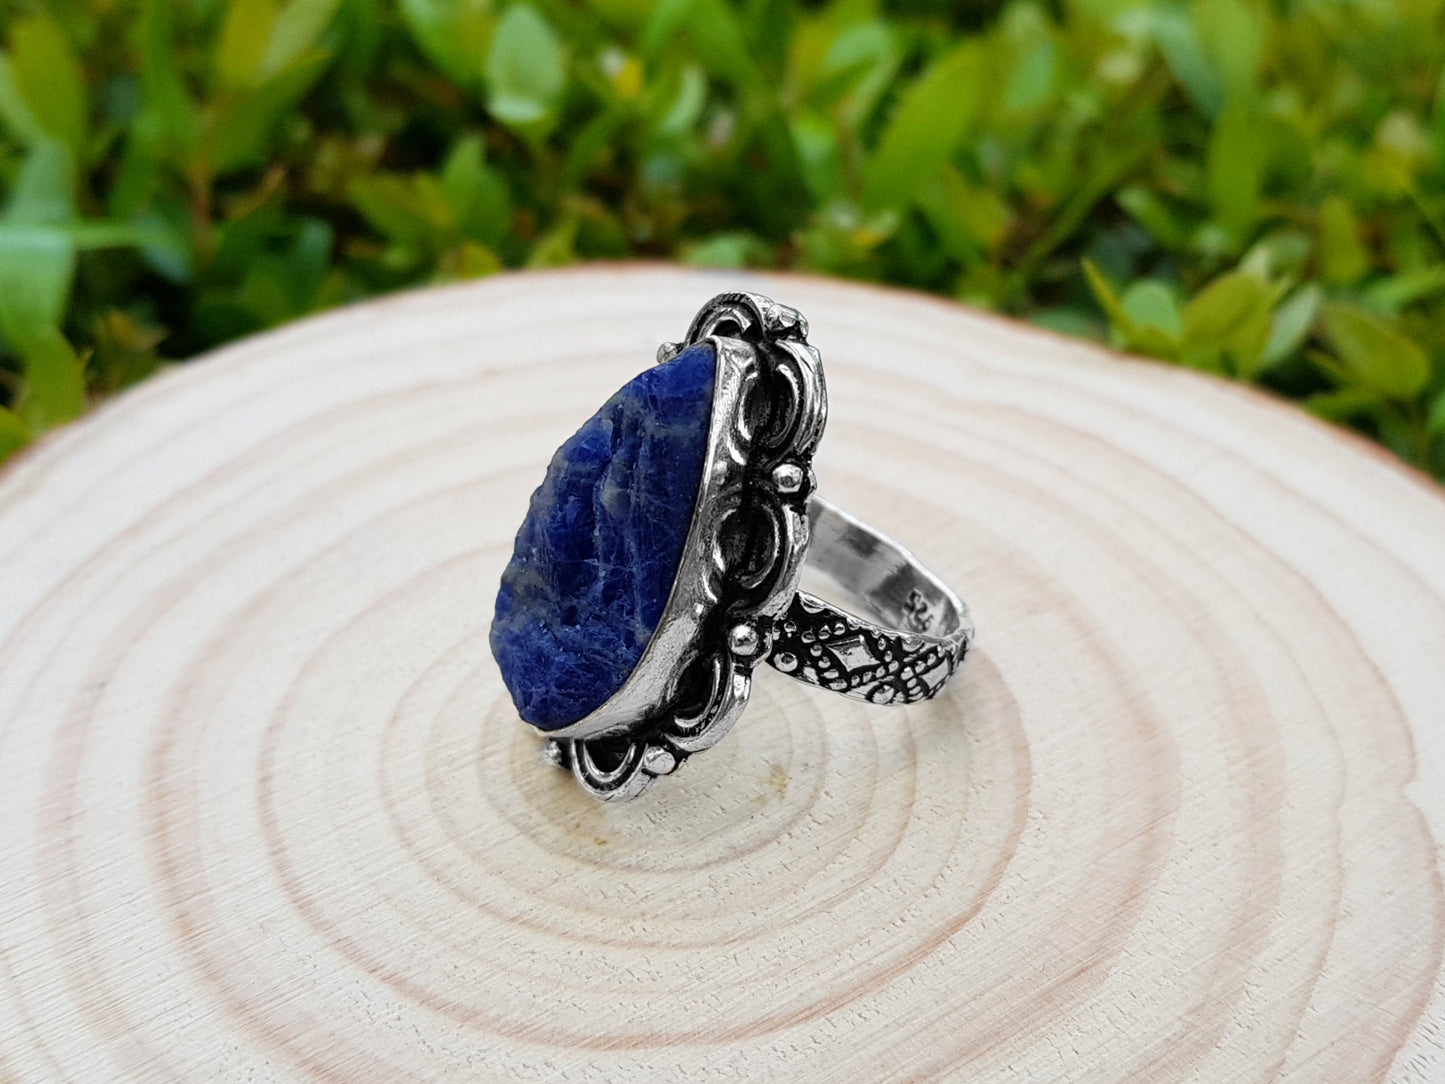 Raw Blue Sodalite Statement Ring Size US 8 1/2 Sterling Silver Gemstone Ring Boho Ring Unique Jewelry Ethnic Ring GypsyJewelry